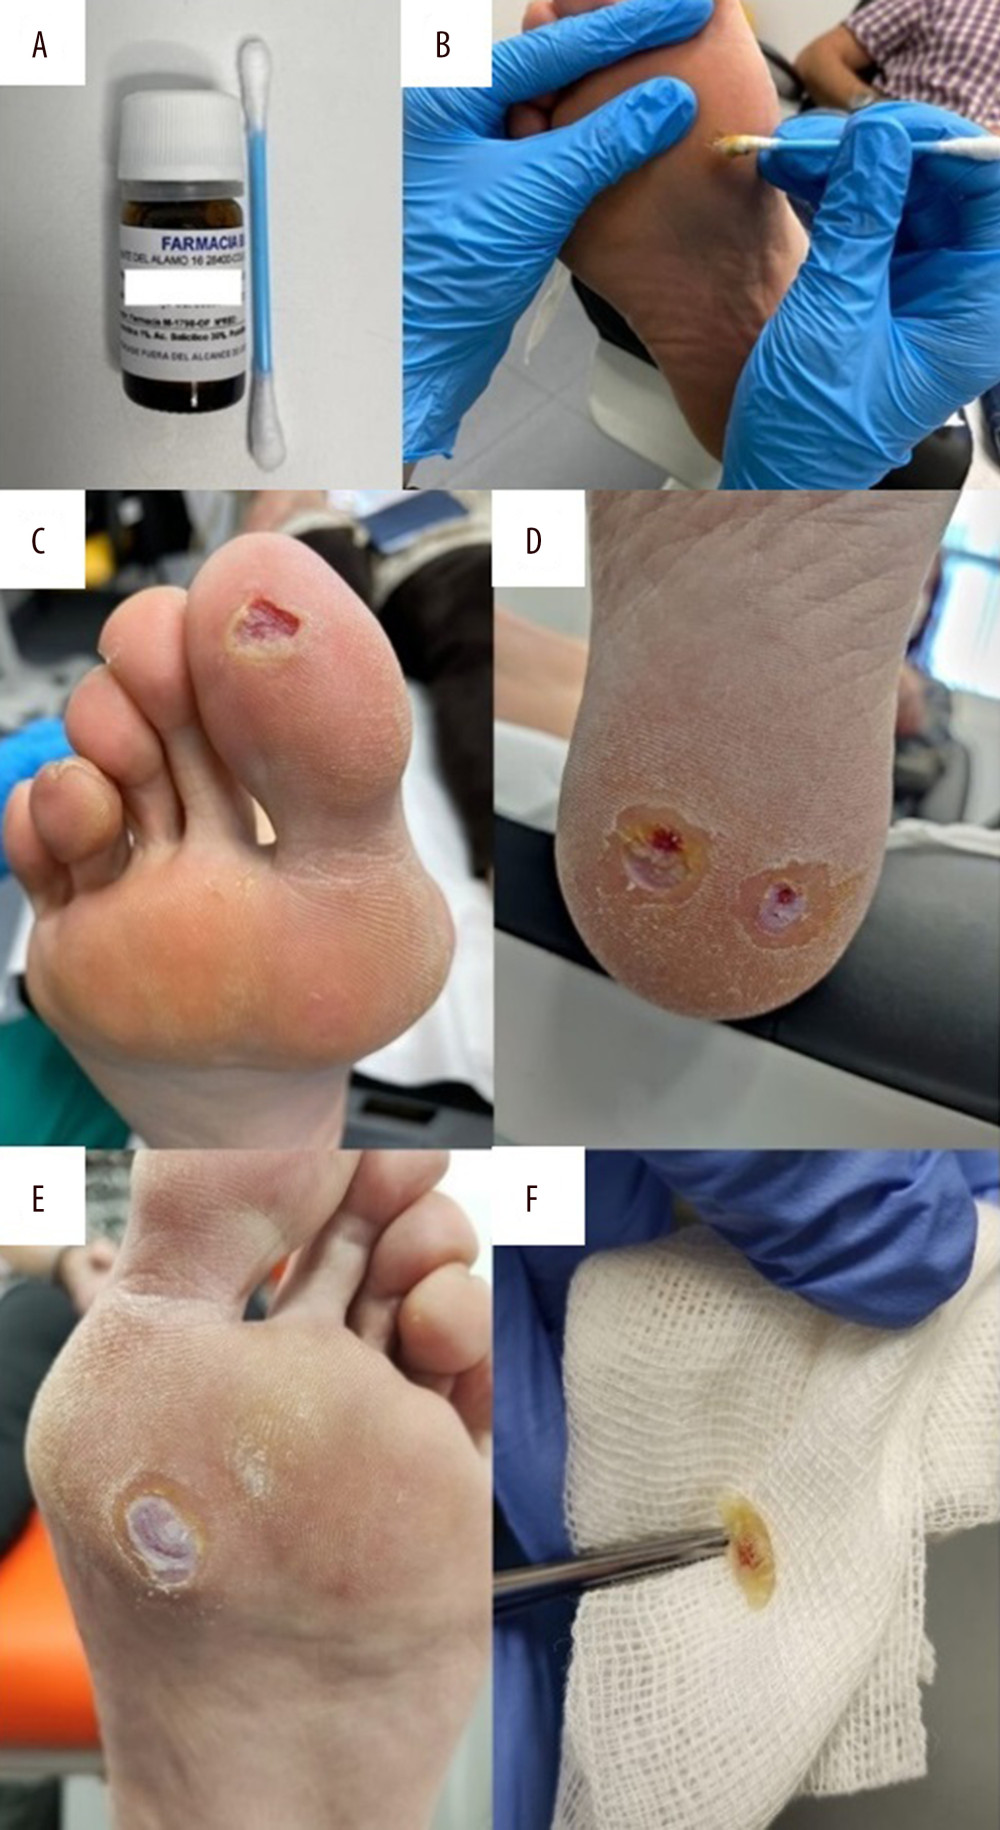 Treatment for plantar wart with cantharidin-podophyllin-salicylic acid (CPS) formulation. (A, B) Application by swabbing the entire surface of the plantar wart. (C) Ball of the hallux of the right foot after 2 days of application. (D) Heel of the left foot after 2 days of application. (E) First metatarsal head of the left foot after 1 day of application. (F) Plantar wart removed.